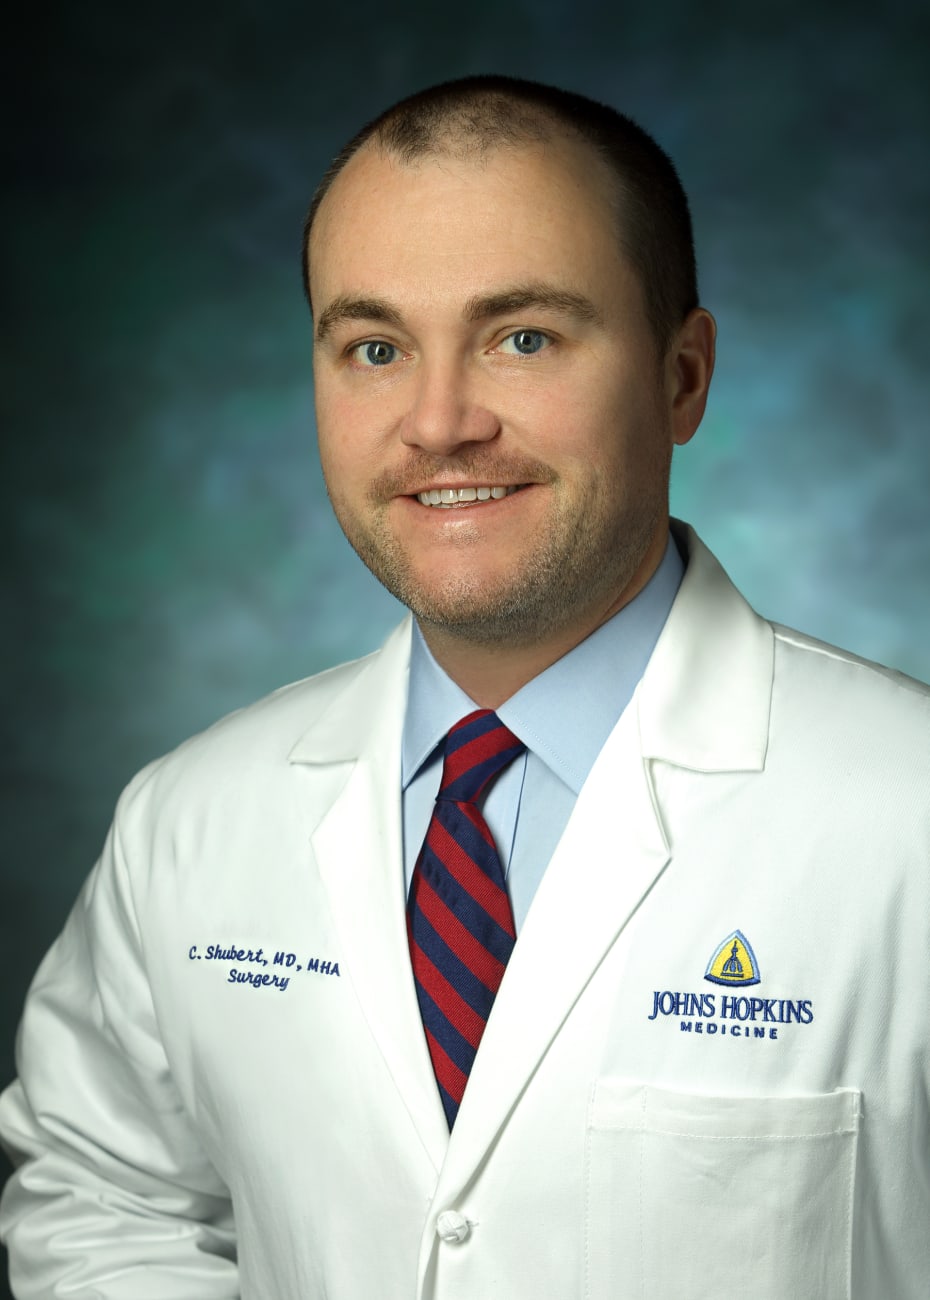 Surgical oncologist Christopher Shubert in a formal portrait, wearing a white lab coat, light blue button down and red and blue striped tie.